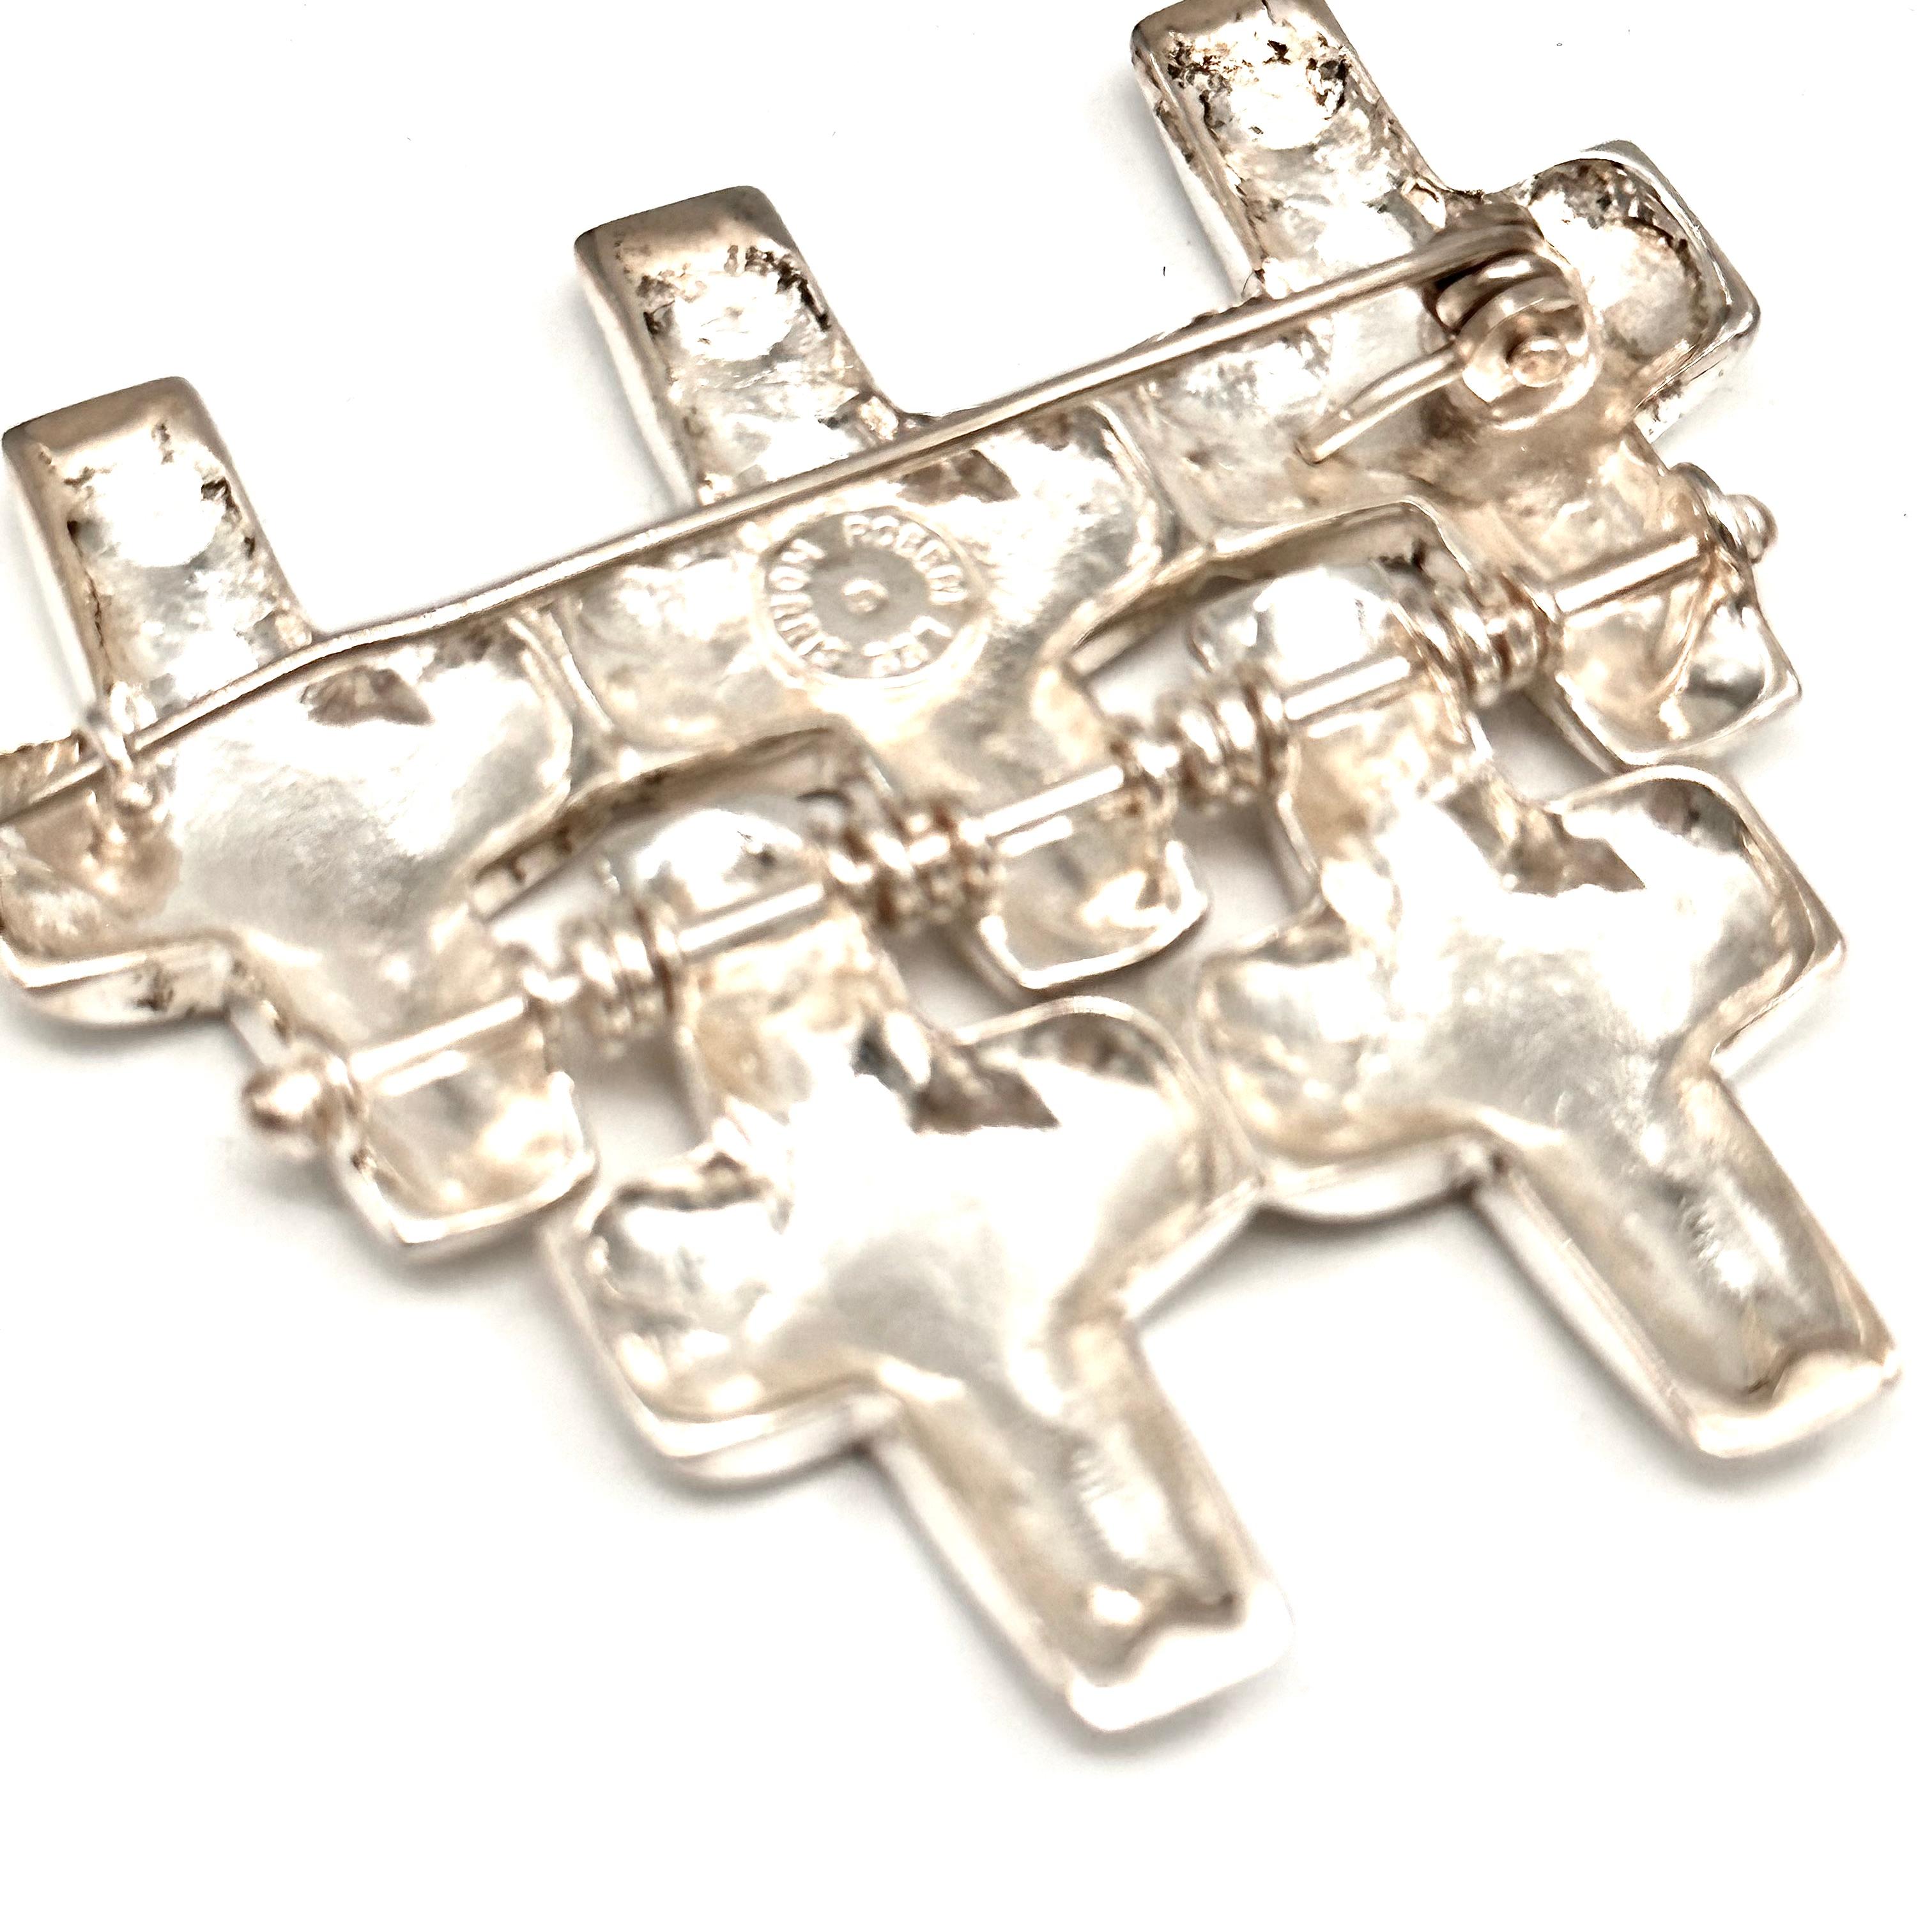 This is a large, flexible, moveable kinetic sterling silver brooch by Robert Lee Morris, constructed in the late 1980's as part of his mens collection. The bottom two crosses swing easily from the top three crosses. There is a sculptural dimension